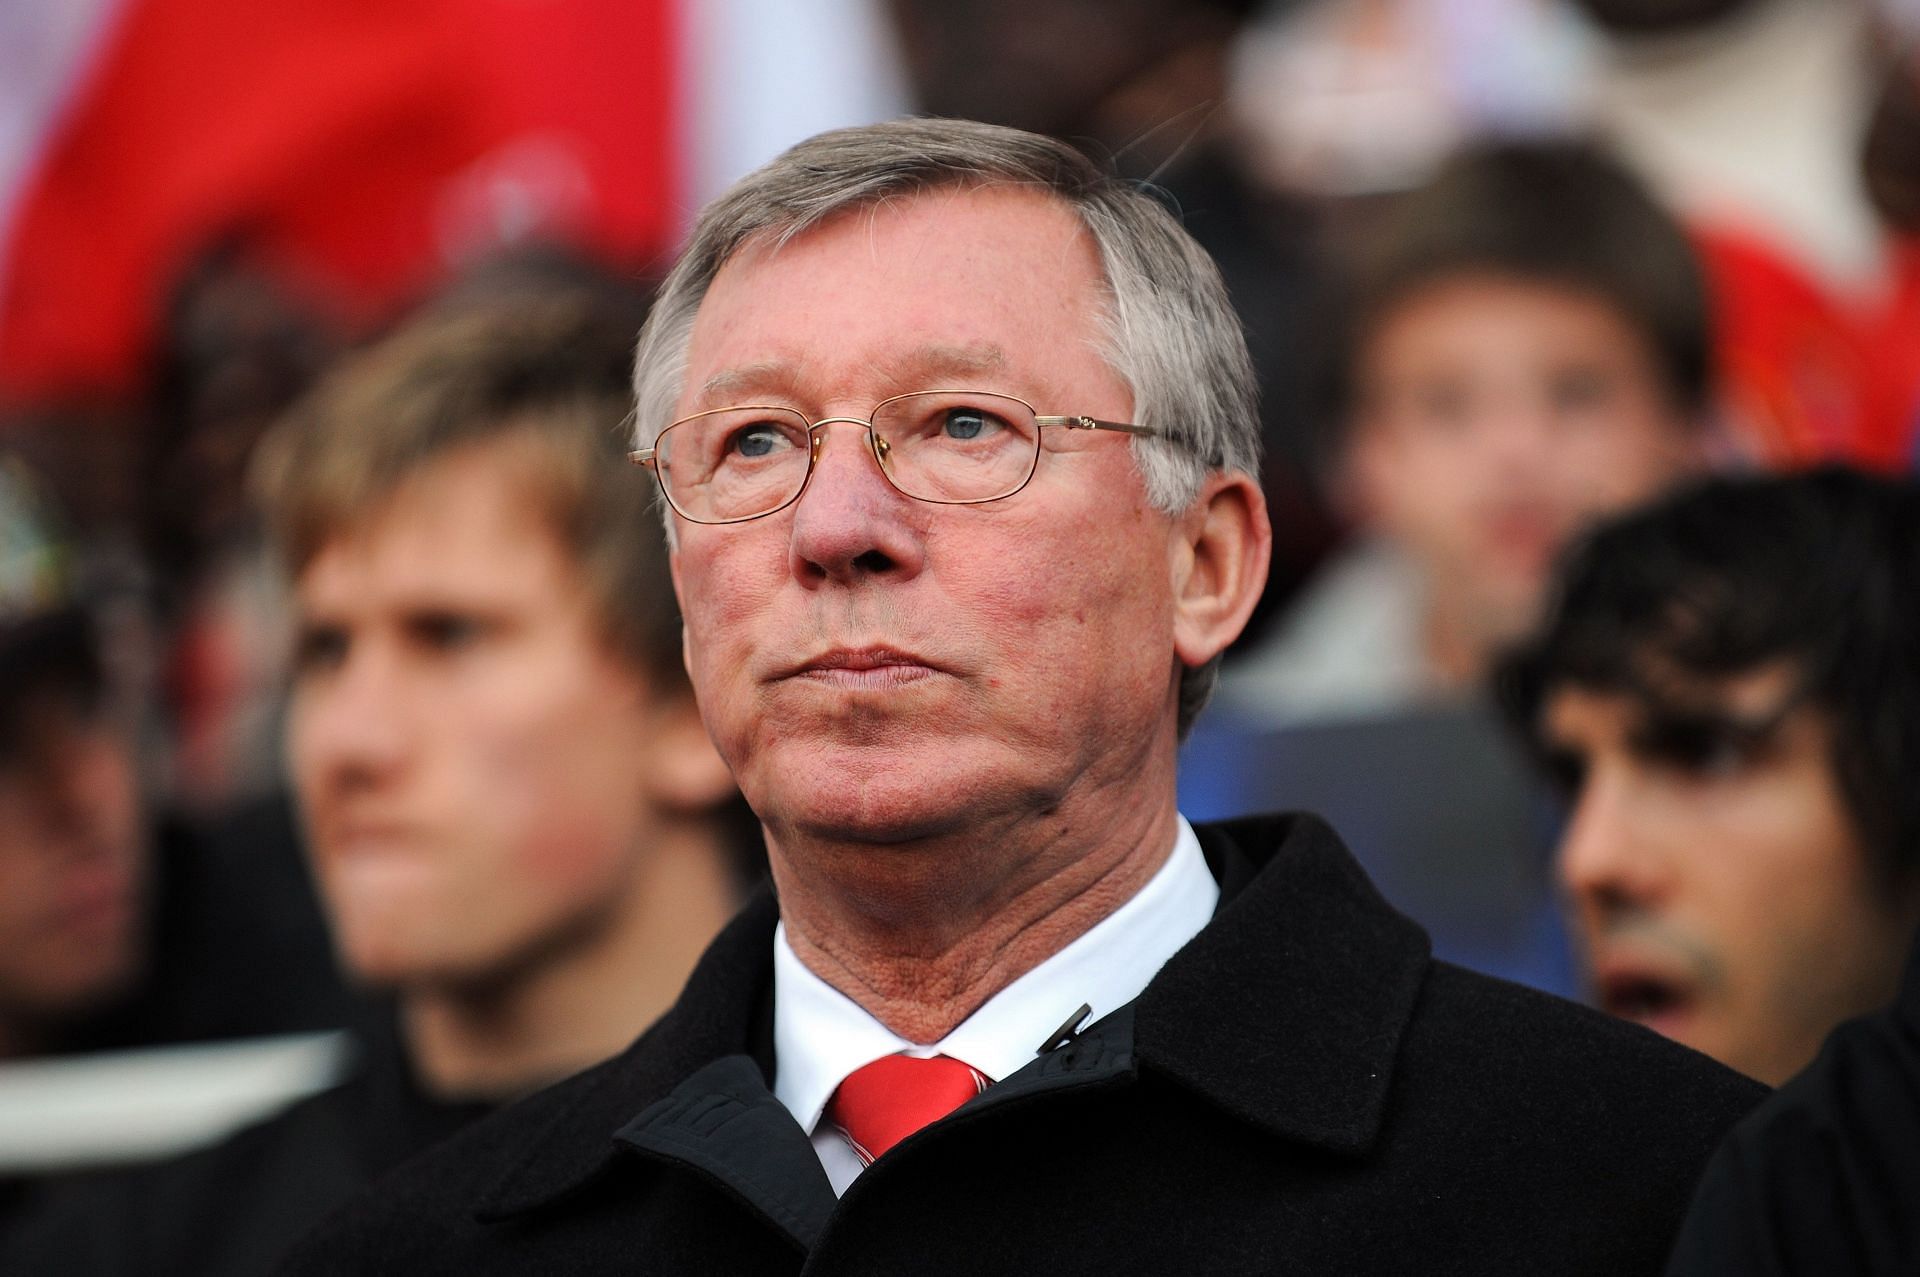 Sir Alex Ferguson remains the most successful manager for Manchester United